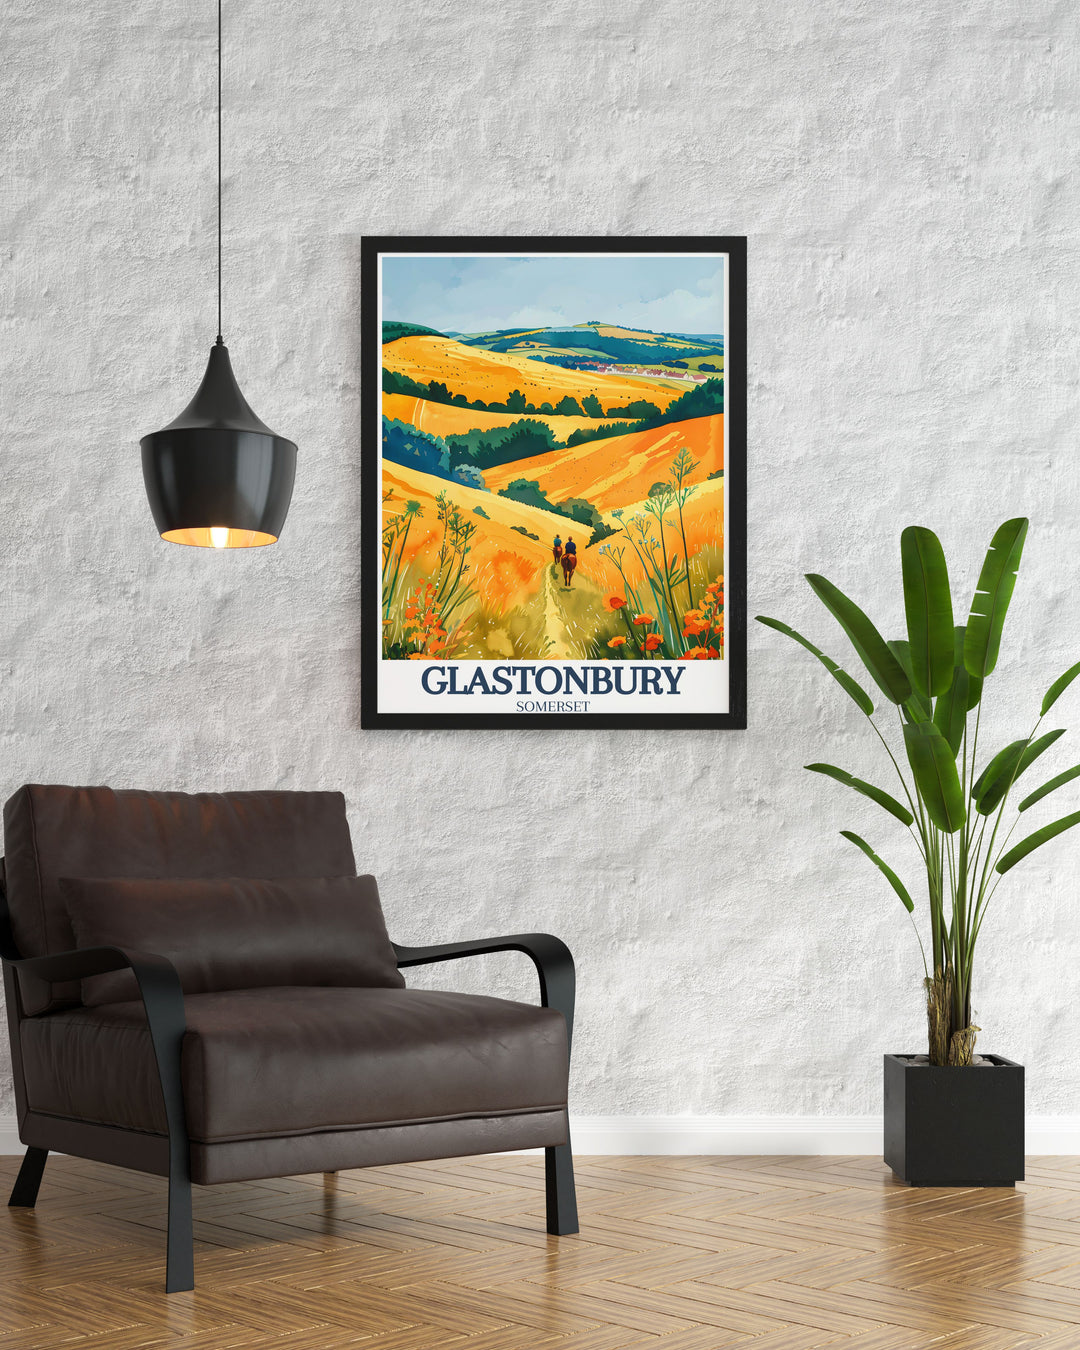 Lovely Glastonbury Tor art print highlighting the natural beauty of Somerset levels and Mendip hills a must have for England wall art fans and those looking to give Glastonbury decor or Somerset levels Mendip hills gifts for special occasions.